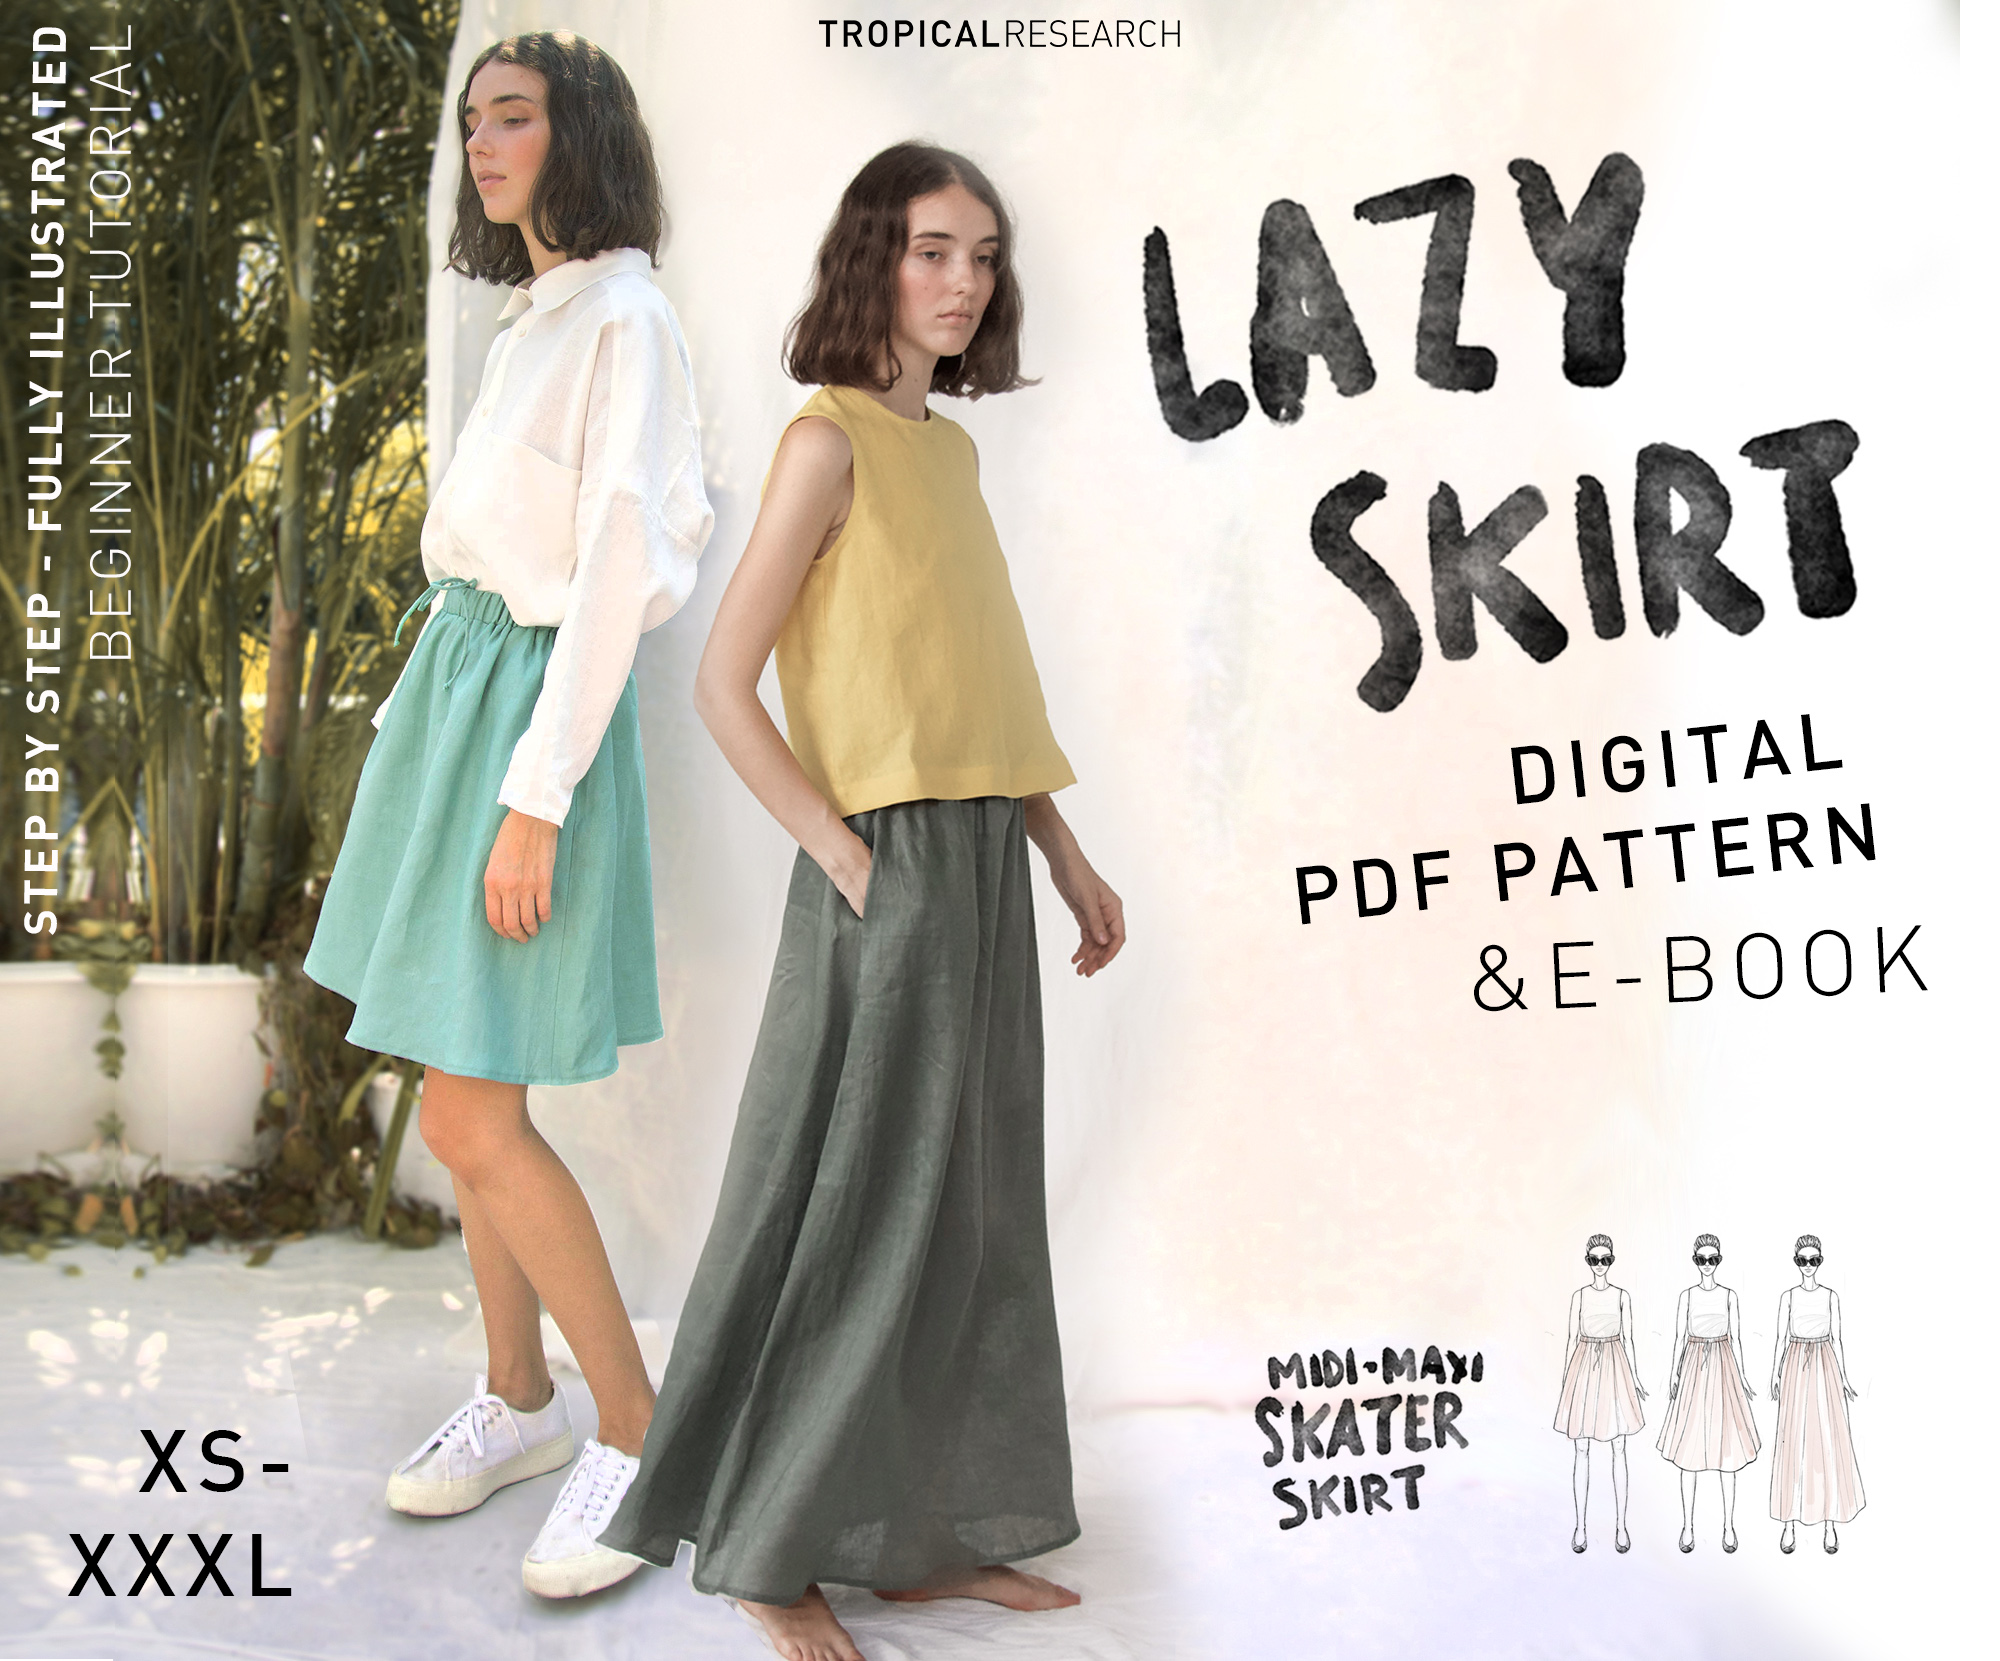 the lazy skirt sewing pattern - TROPICAL RESEARCH